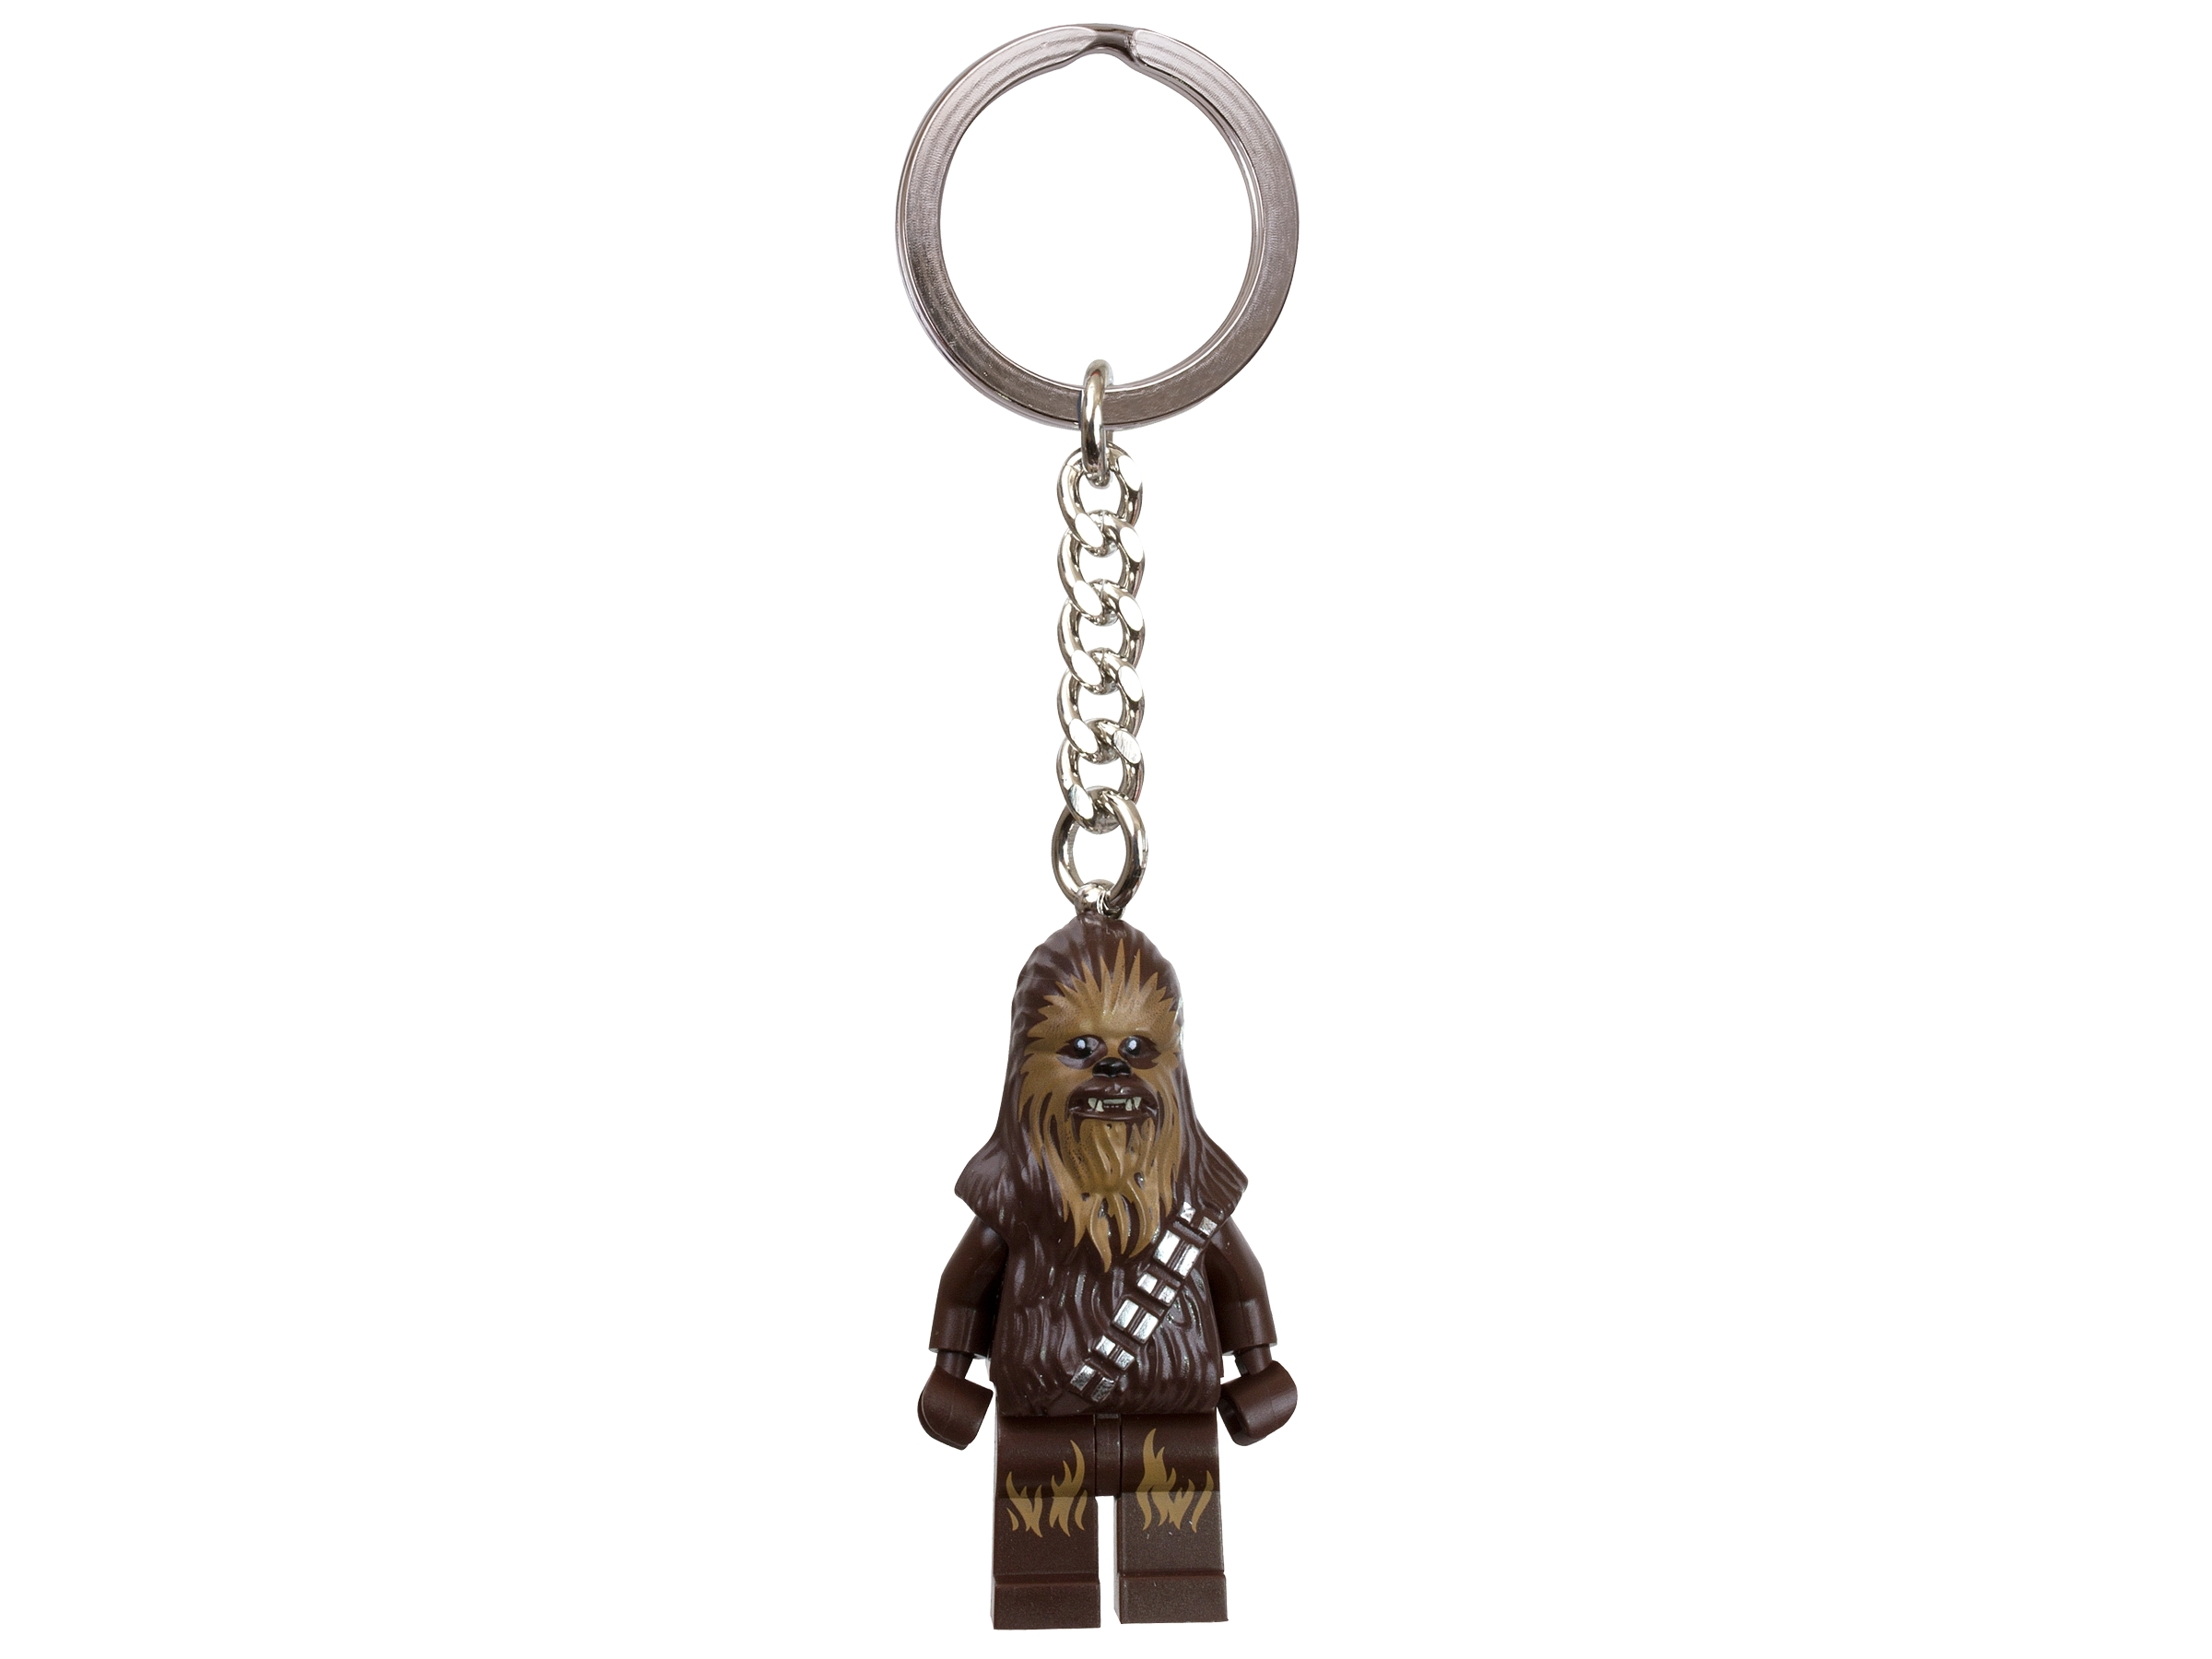 OFFICIAL STAR WARS KEYCHAIN CHEWBACCA RK38346 NEW PACKAGED 